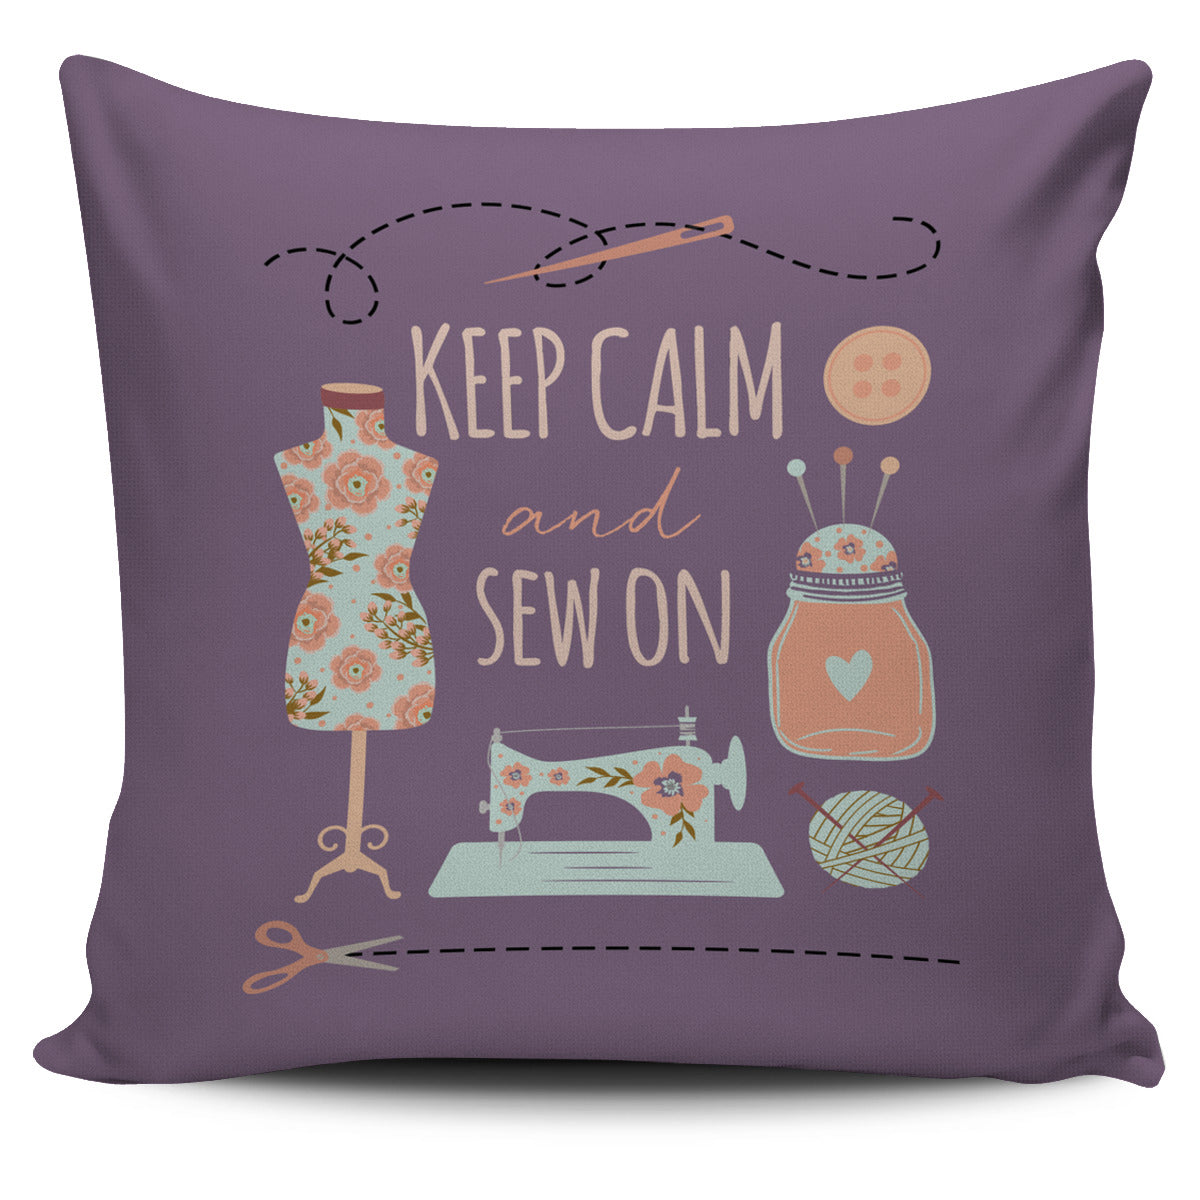 Sew On Pillow Cover